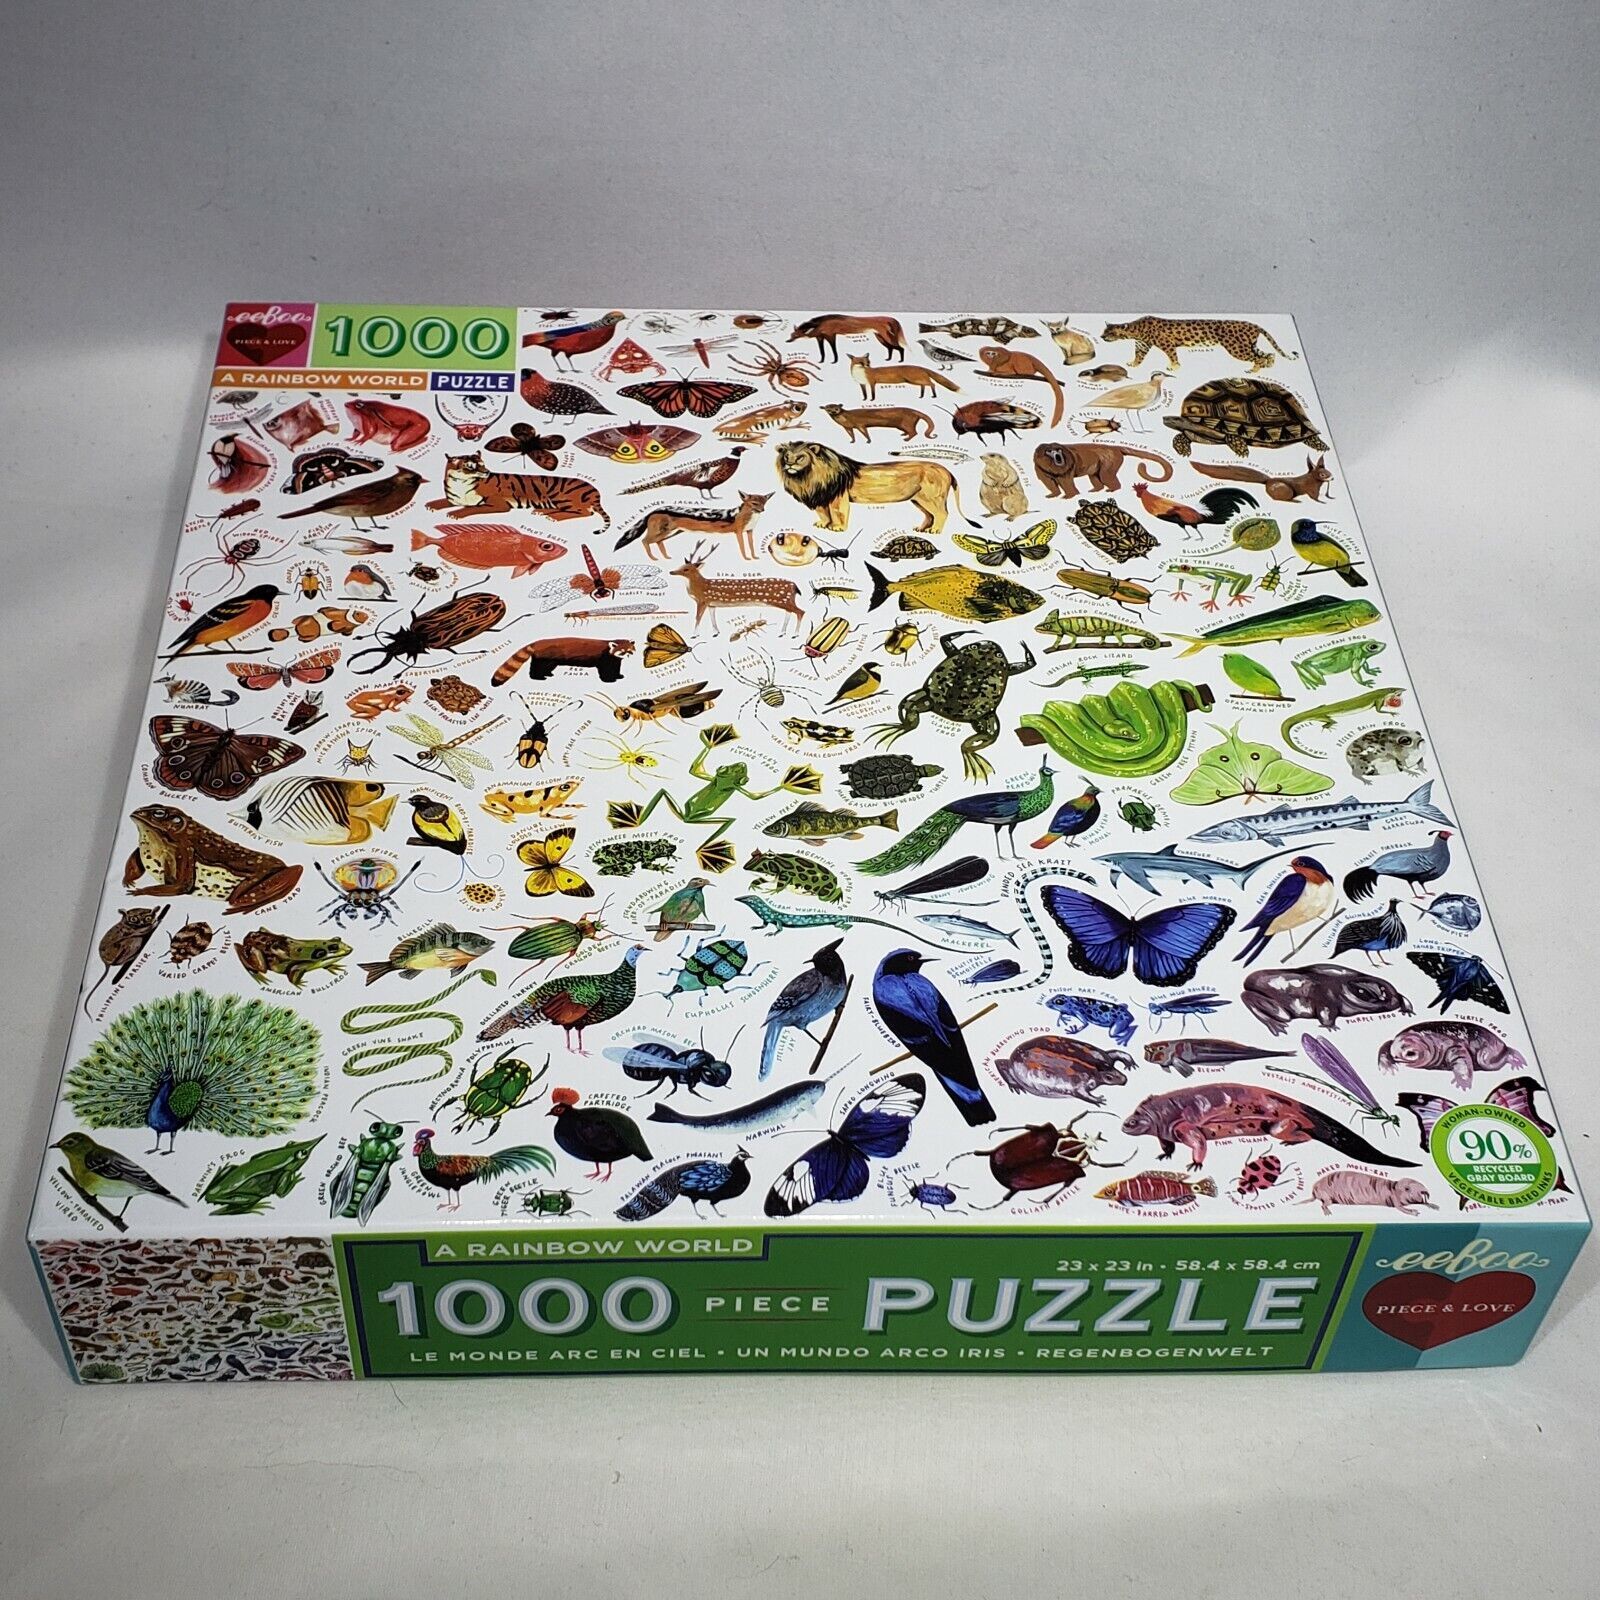 Primary image for EeBoo A Rainbow World 1000 Piece Jigsaw Puzzle New Open Box Pieces Sealed